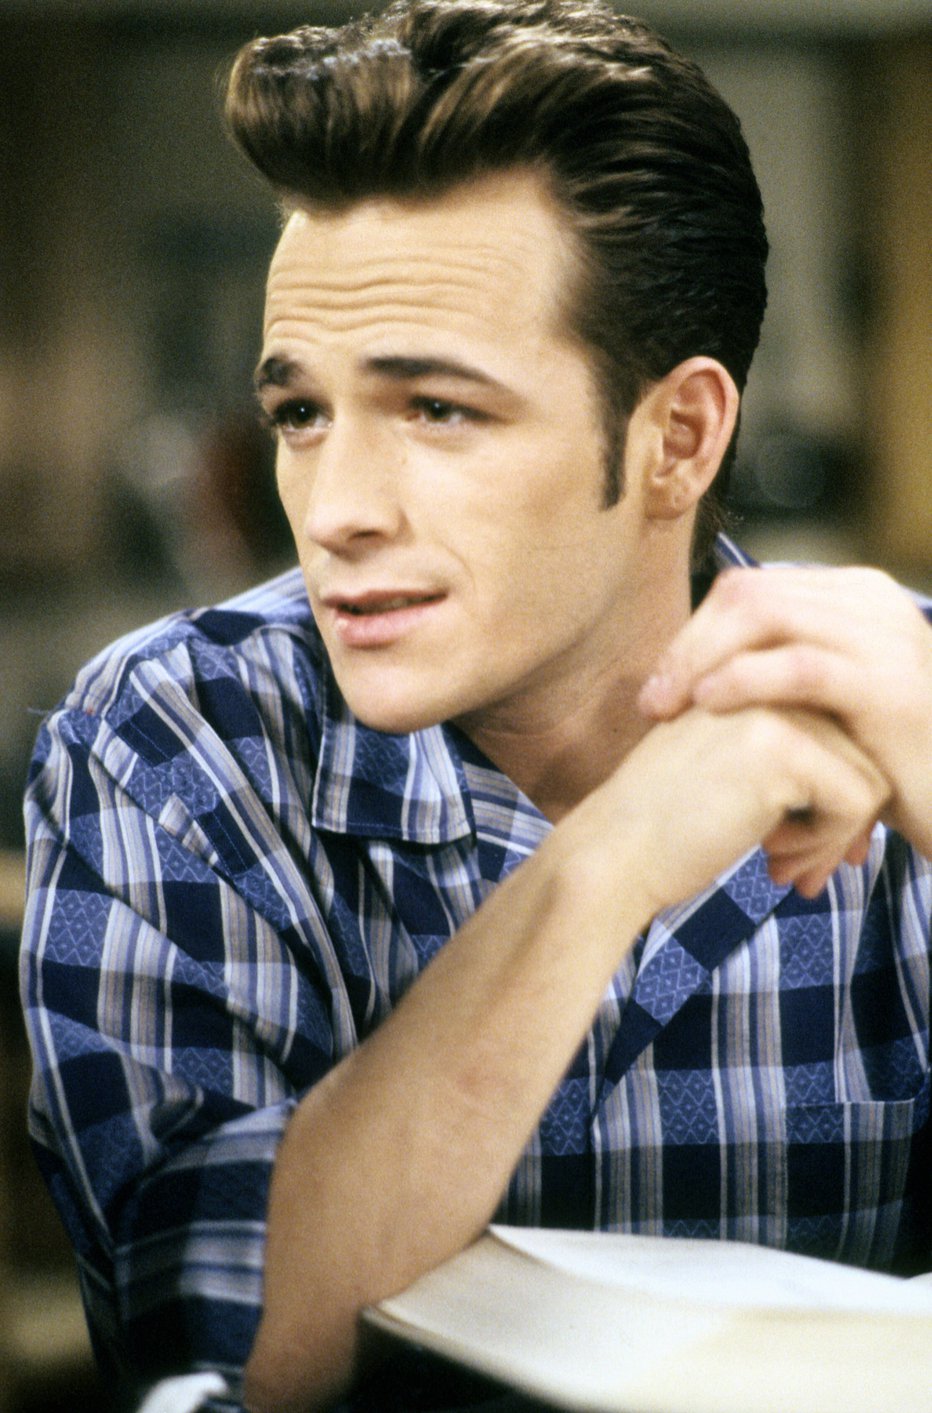 Fotografija: Luke Perry (as Dylan Michael McKay)
Beverly Hills 90210 (FOX)

Featuring: Luke Perry (as Dylan Michael McKay)
When: 04 Jul 1990
Credit: WENN.com

**WENN does not claim any ownership including but not limited to Copyright or License in the attached material. Fees charged by WENN are for WENN's services only, and do not, nor are they intended to, convey to the user any ownership of Copyright or License in the material. By publishing this material you expressly agree to indemnify and to hold WENN and its directors, shareholders and employees harmless from any loss, claims, damages, demands, expenses (including legal fees), or any causes of action or allegation against WENN arising out of or connected in any way with publication of the material.**